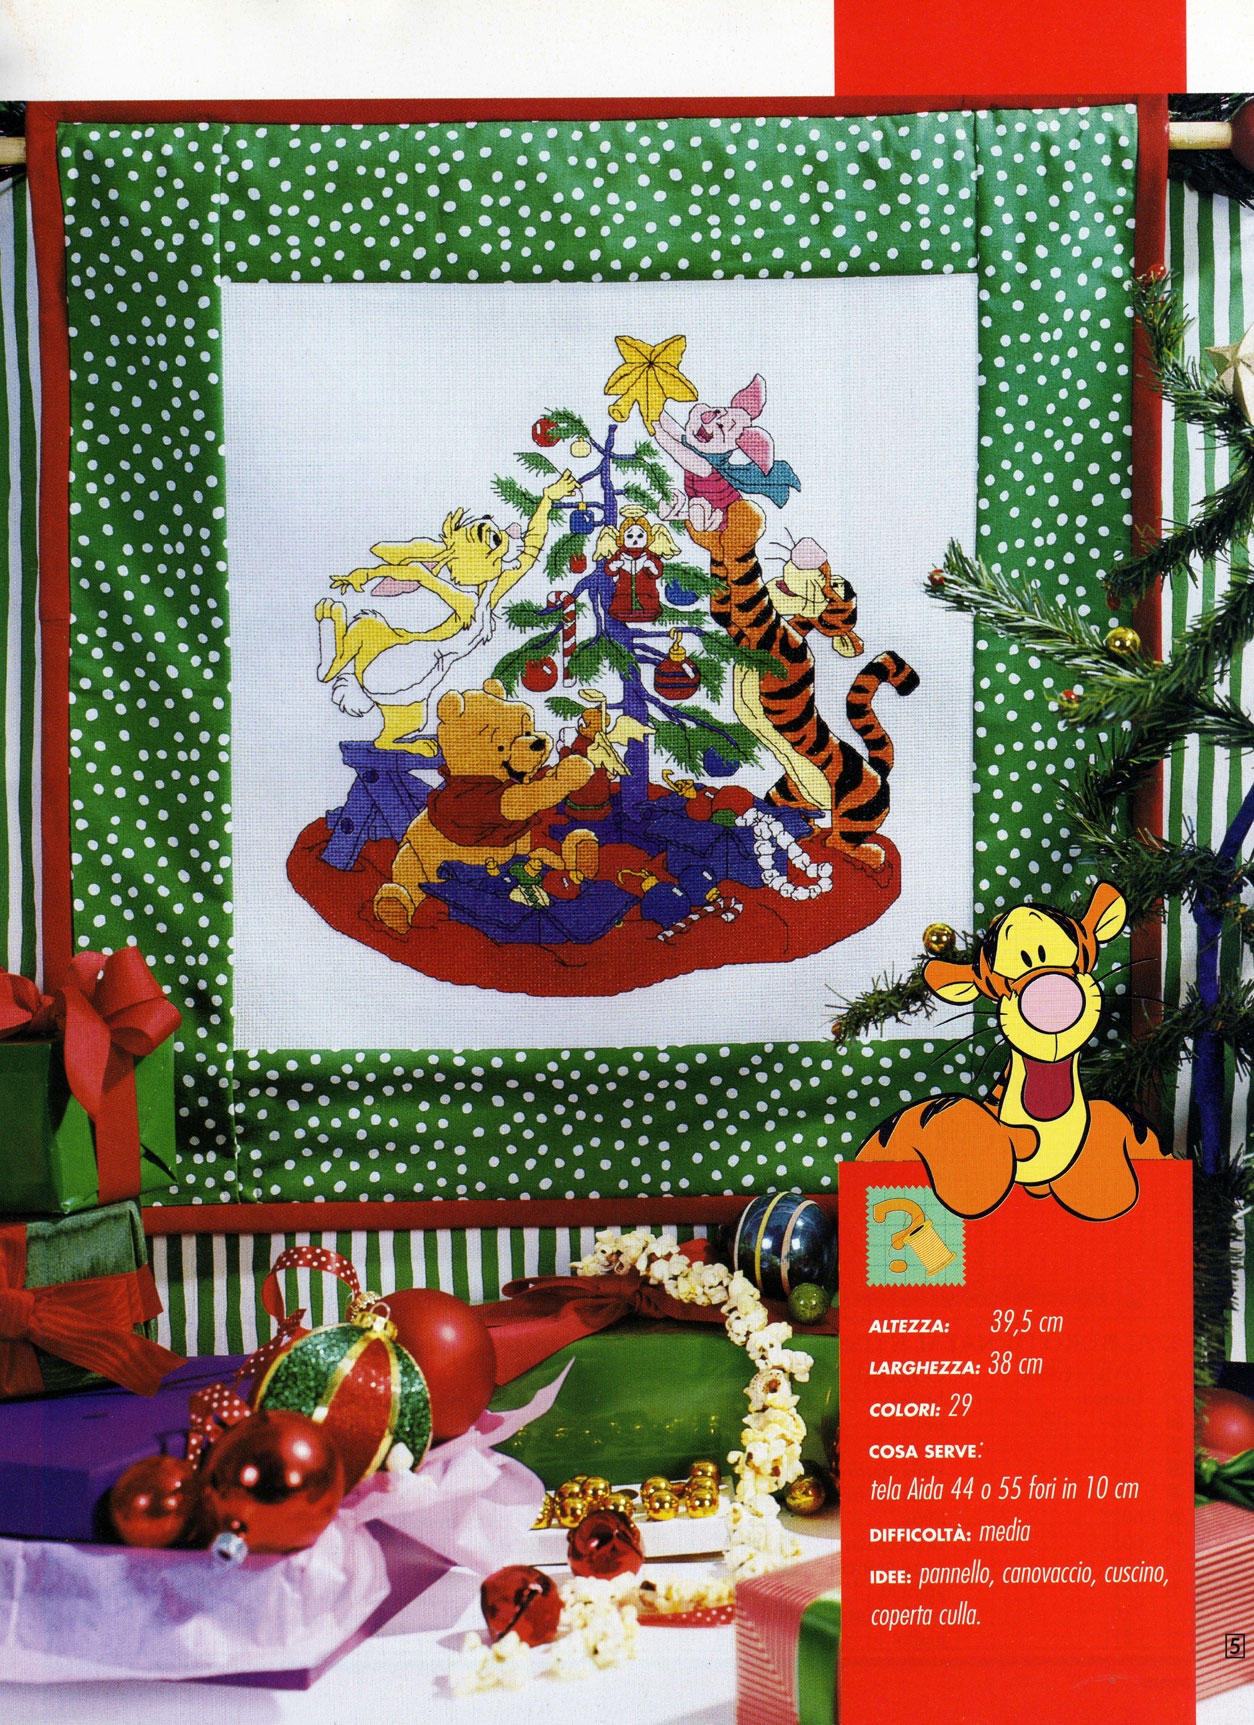 friends of winnie the pooh decorate the Christmas tree (1)